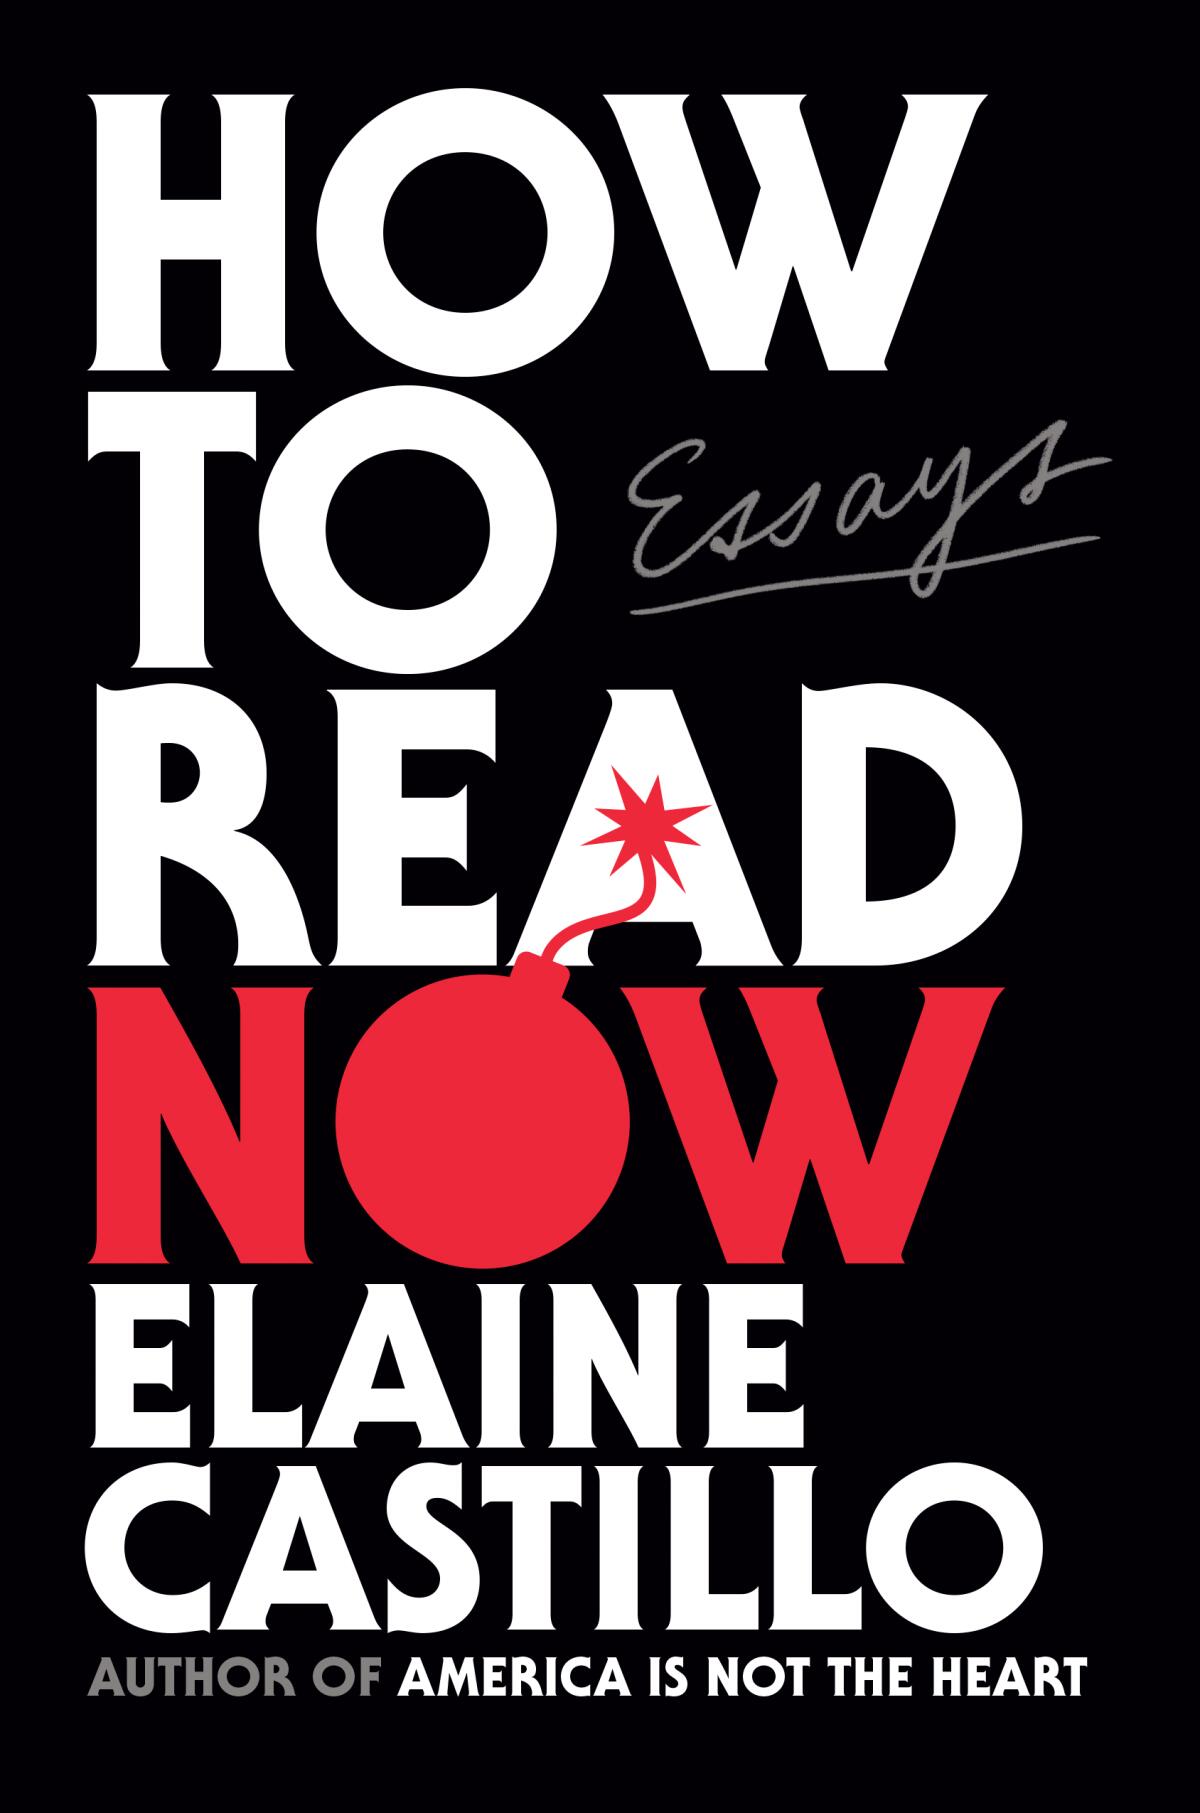 "How To Read Now" by author Elaine Castillo